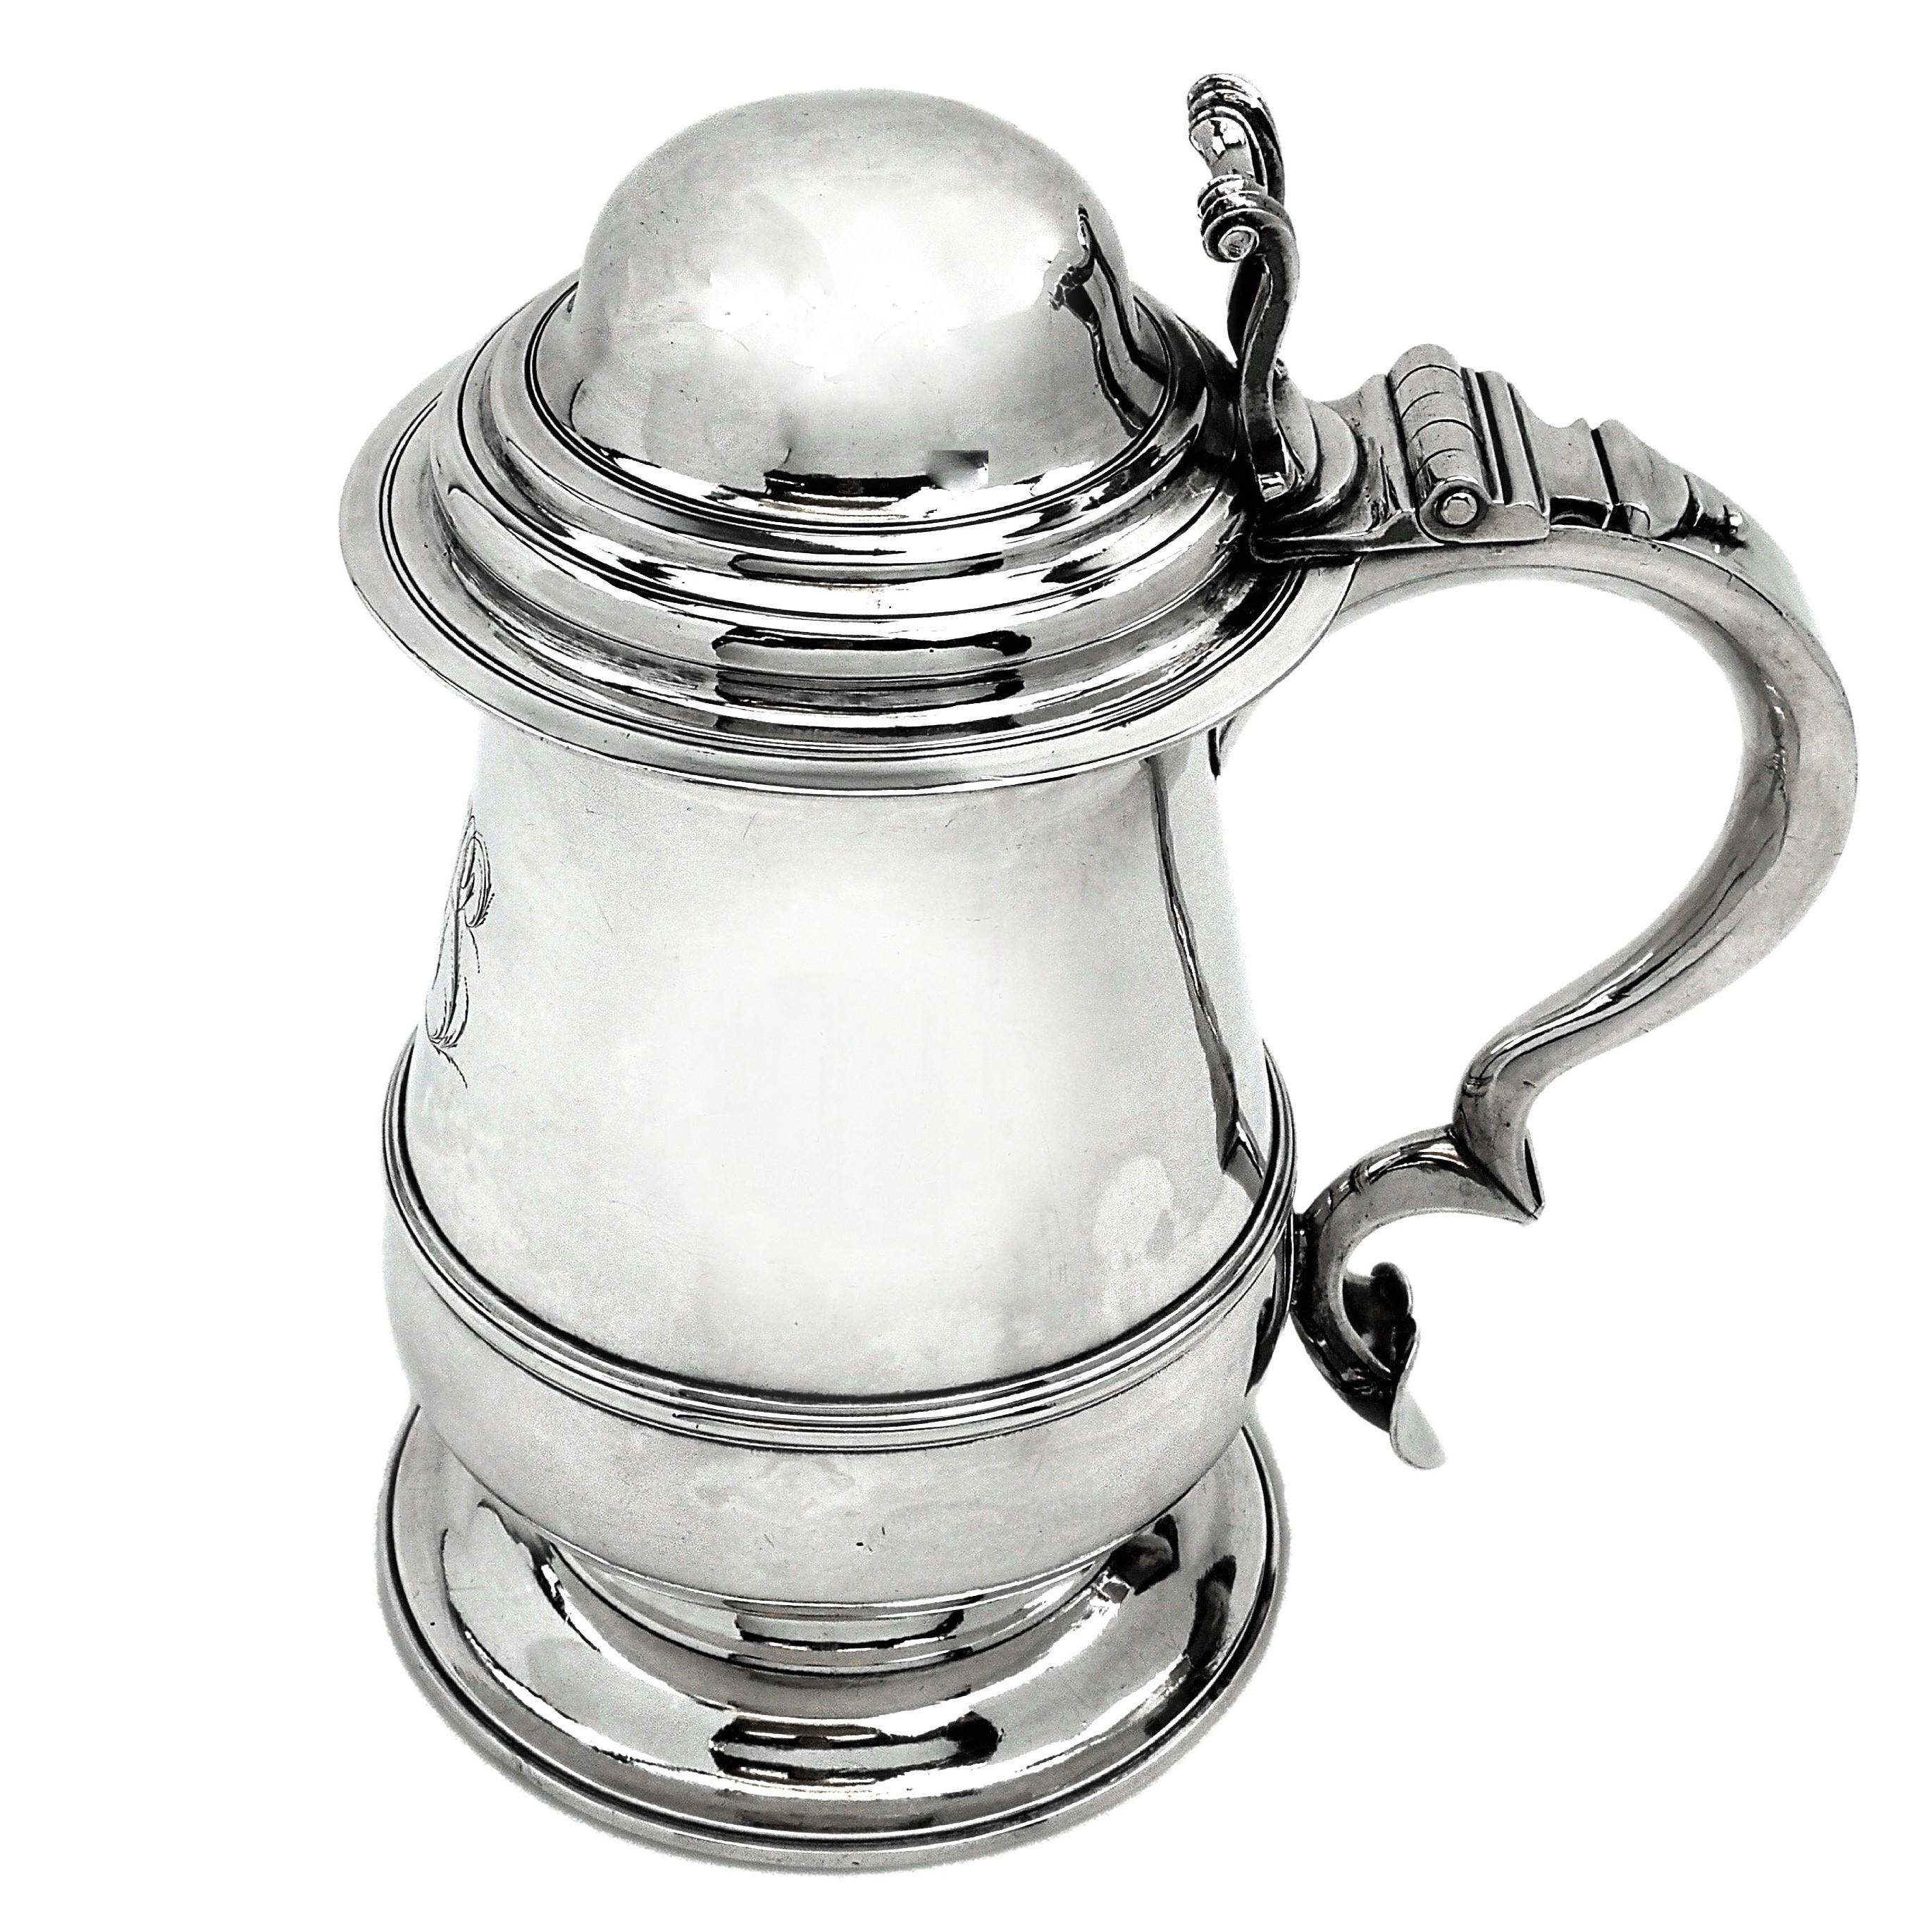 A magnificent Antique George III solid silver lidded tankard. This Tankard has a traditional Georgian baluster shaped body on a wide spread foot topped with a substantial domed hinged lid with an impressive thumb piece. This Tankard features all the